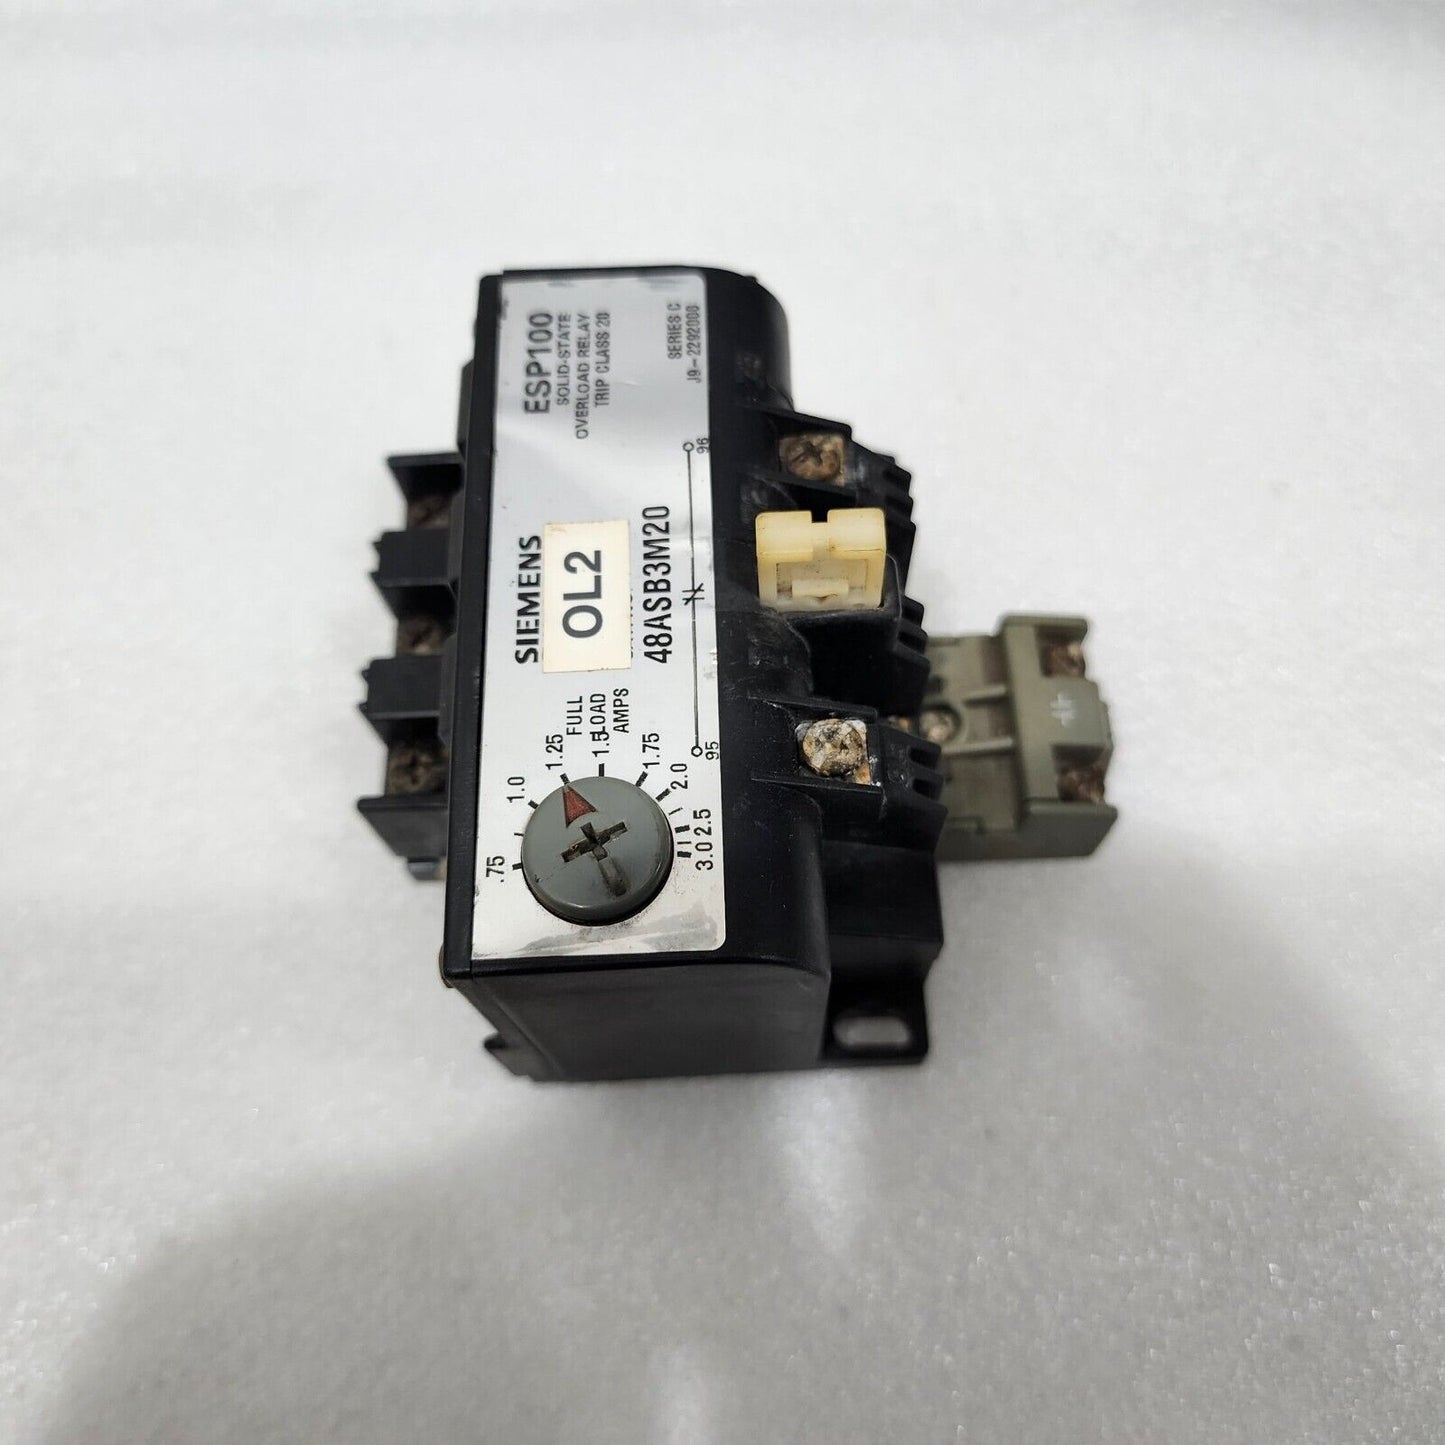 SIEMENS ESP 100 SOLID STATE OVERLOAD RELAY 48ASB3M20 0.75-3A